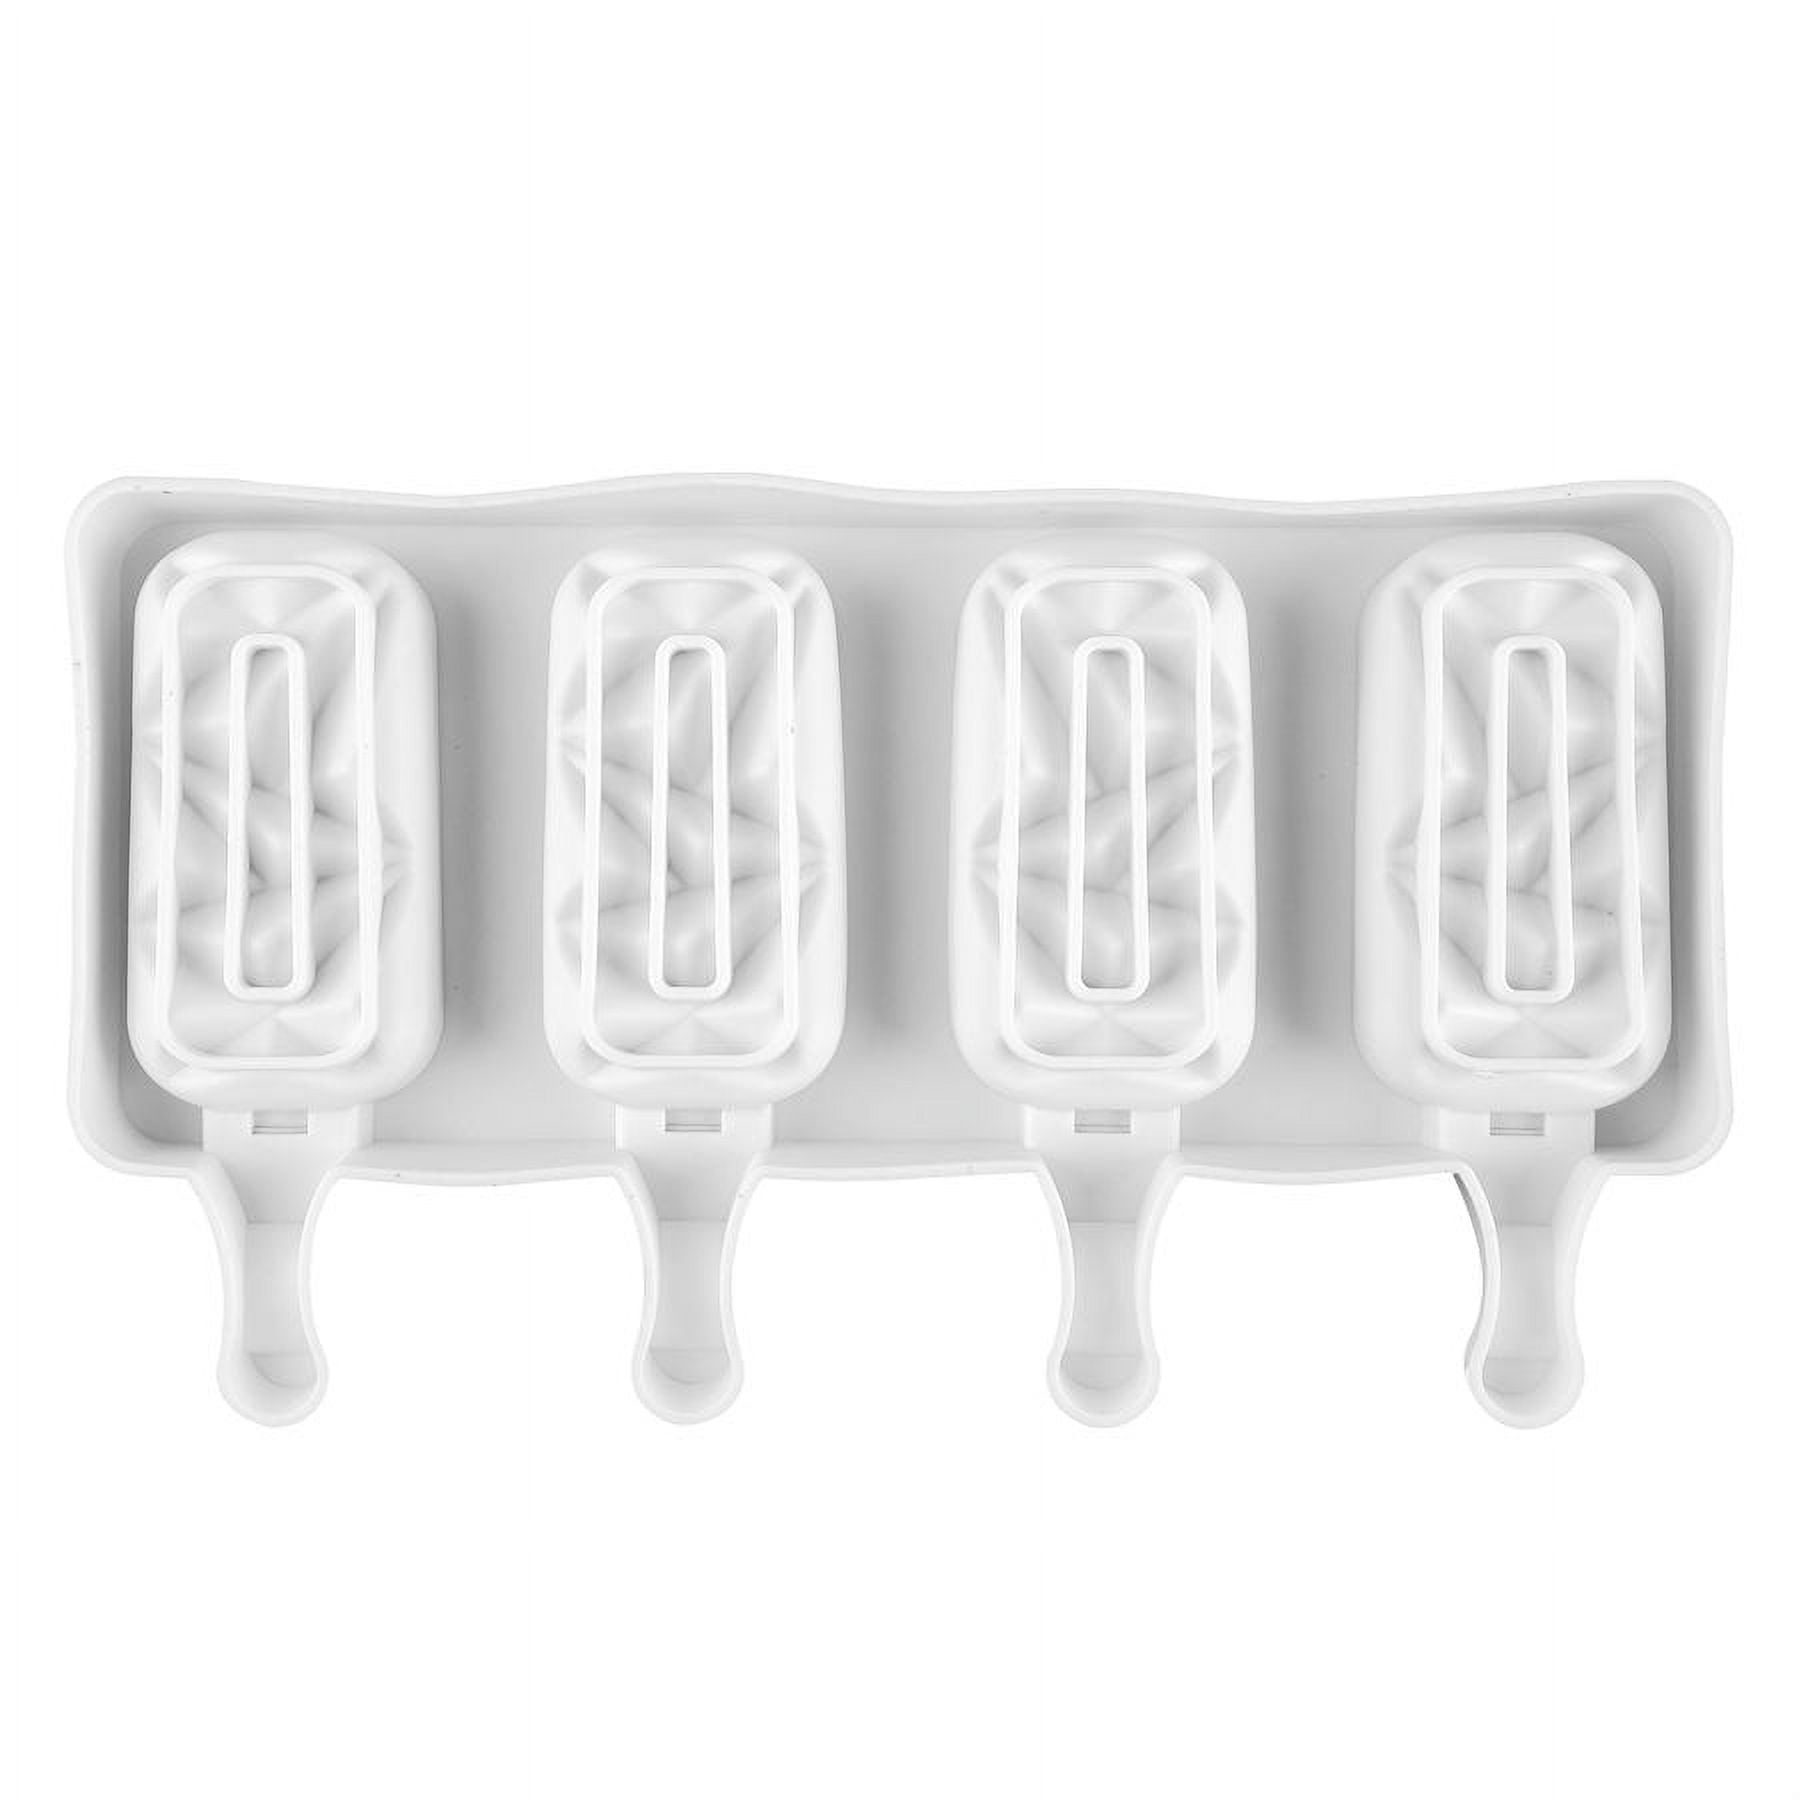 Zubebe 8 Pcs Silicone Ice Cream Mold 4 Cavity Ice Lolly Mold Reusable  Diamond and Cakesicle shaped Cakesicles Mold with 200 Pcs of Wooden Sticks  for